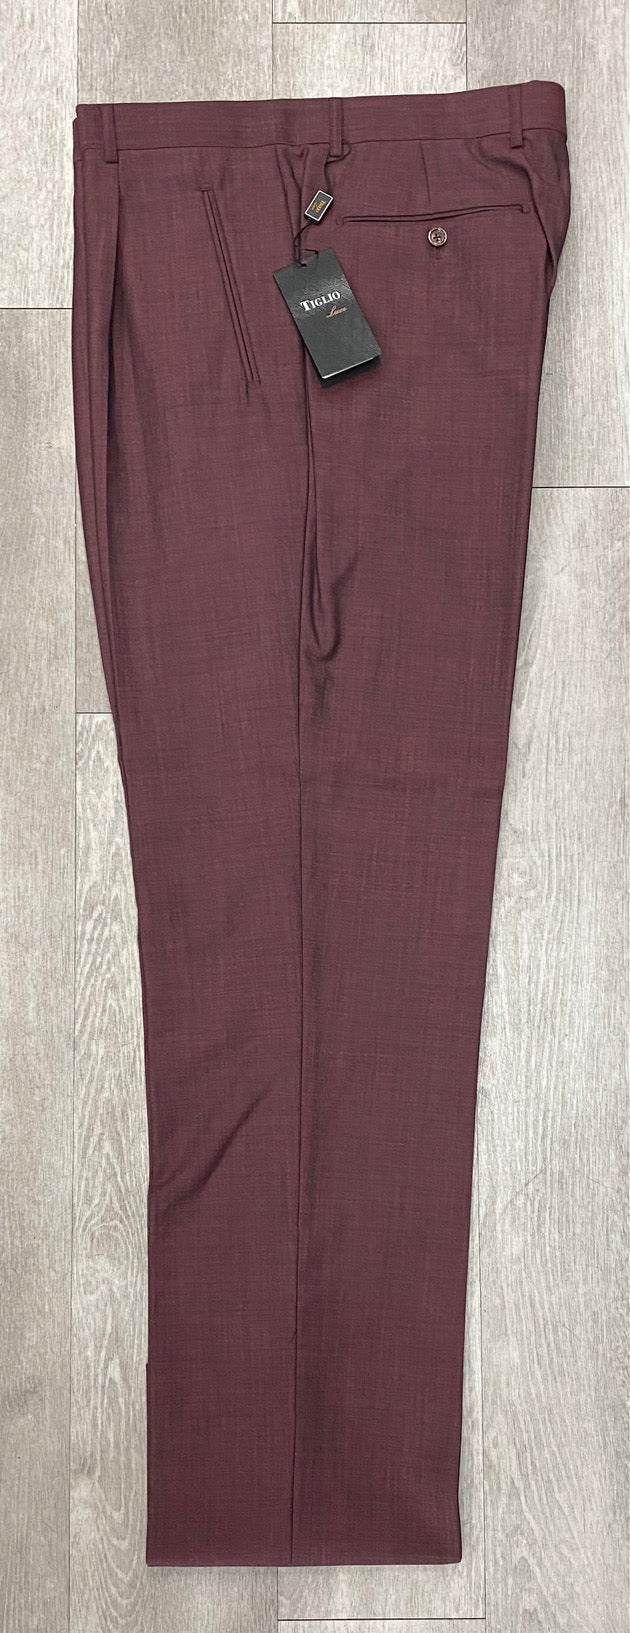 Tiglio Luxe 2521 Comfort Fit Single Pleated Pants 18+ Inch Leg TIG4102B Burgundy (SIZE 50 ONLY)